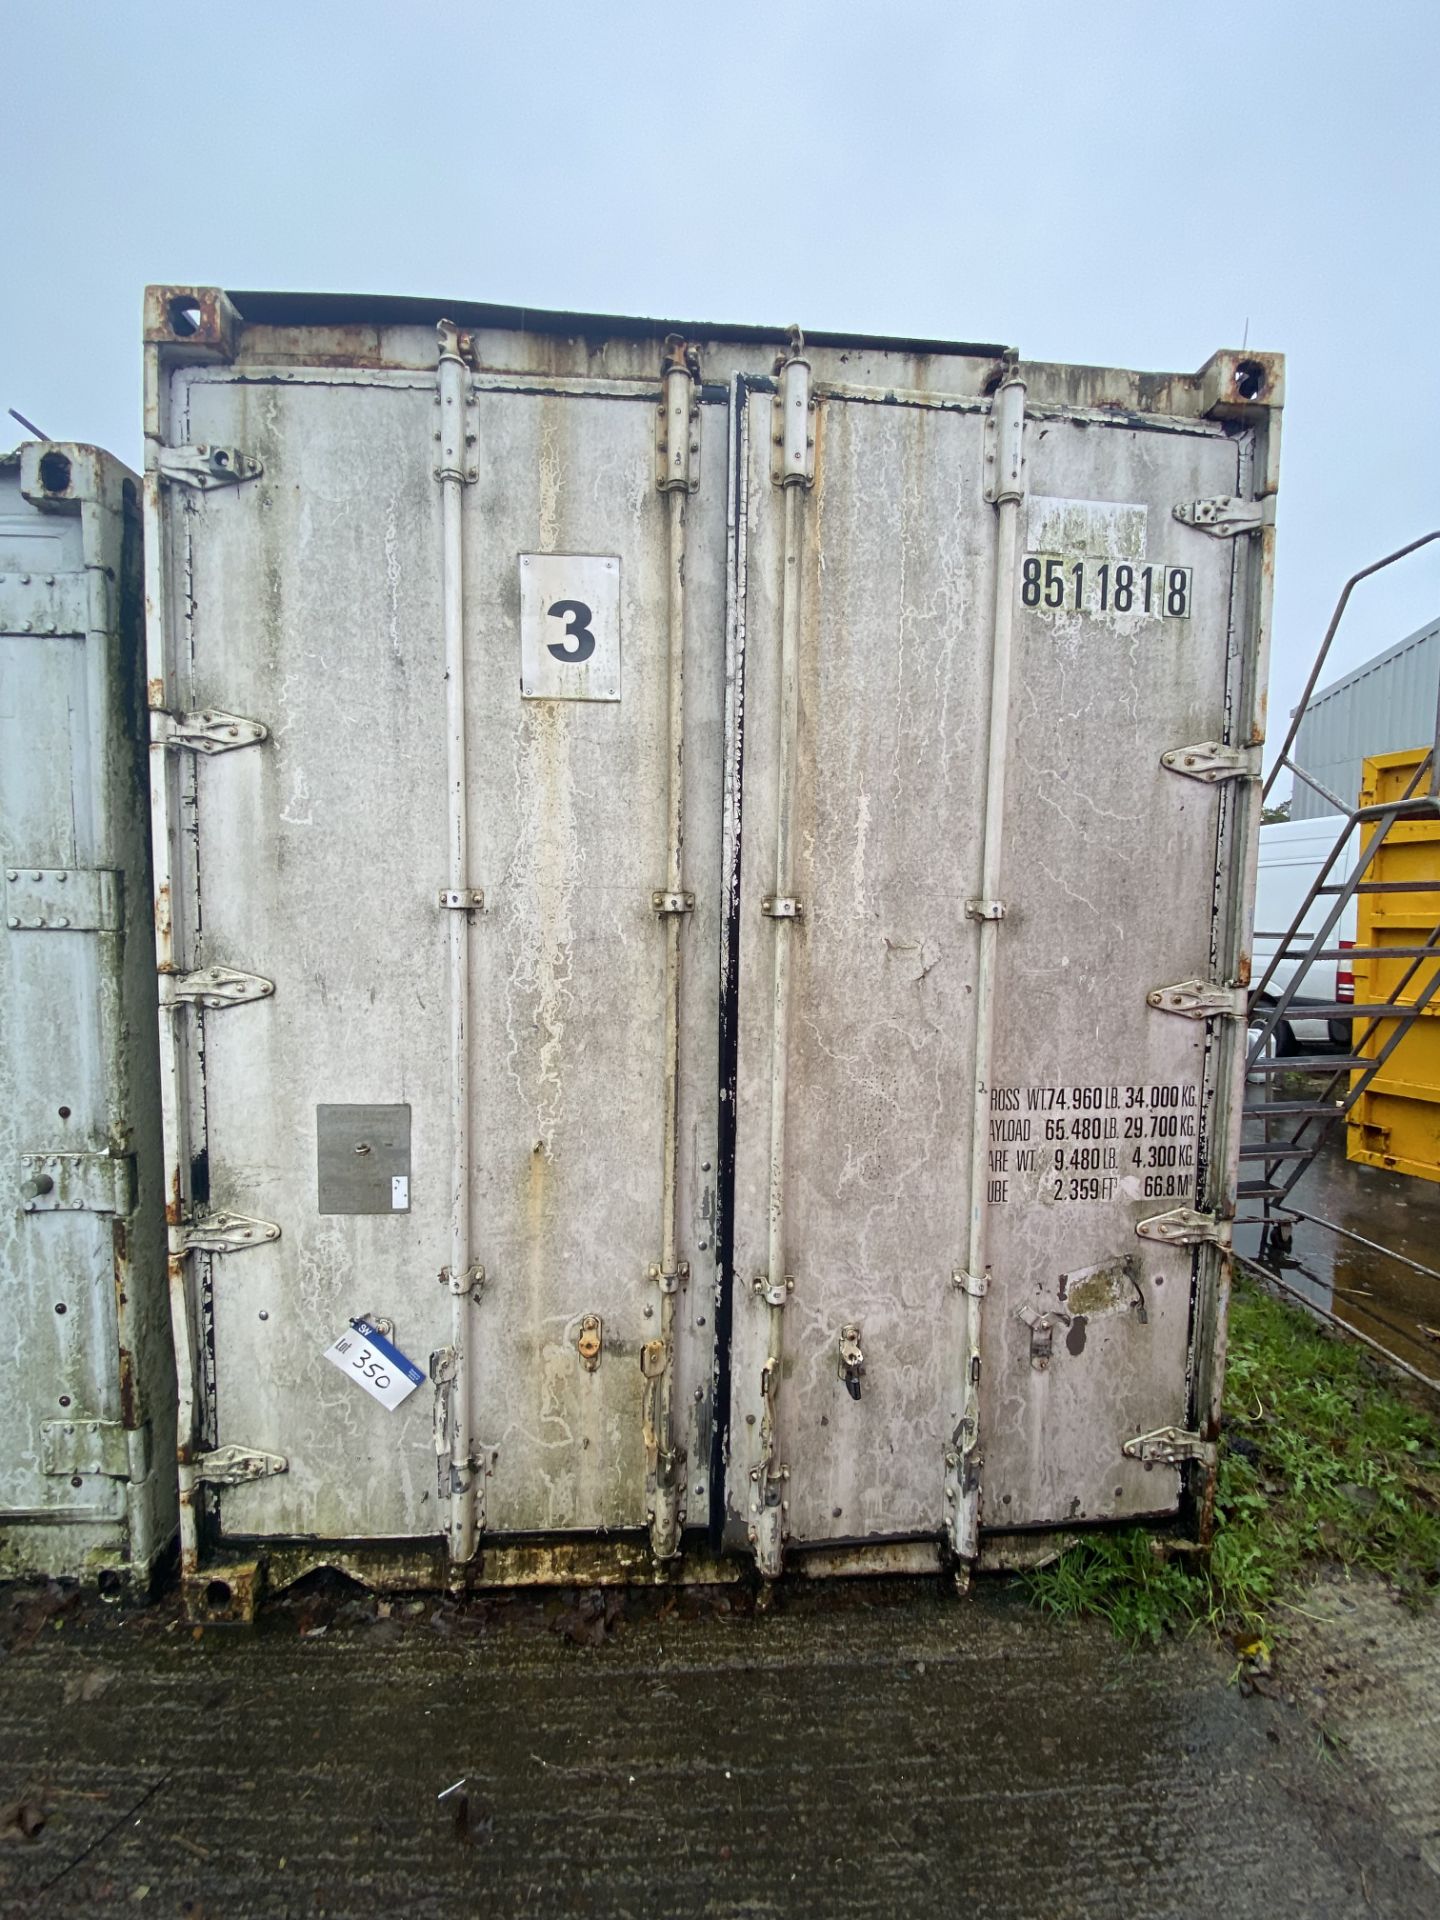 Maersk MC1-RAHC-972 REFRIGERATED CARGO CONTAINER, serial no.23670, year of manufacture 1999, 11.5m - Image 2 of 6